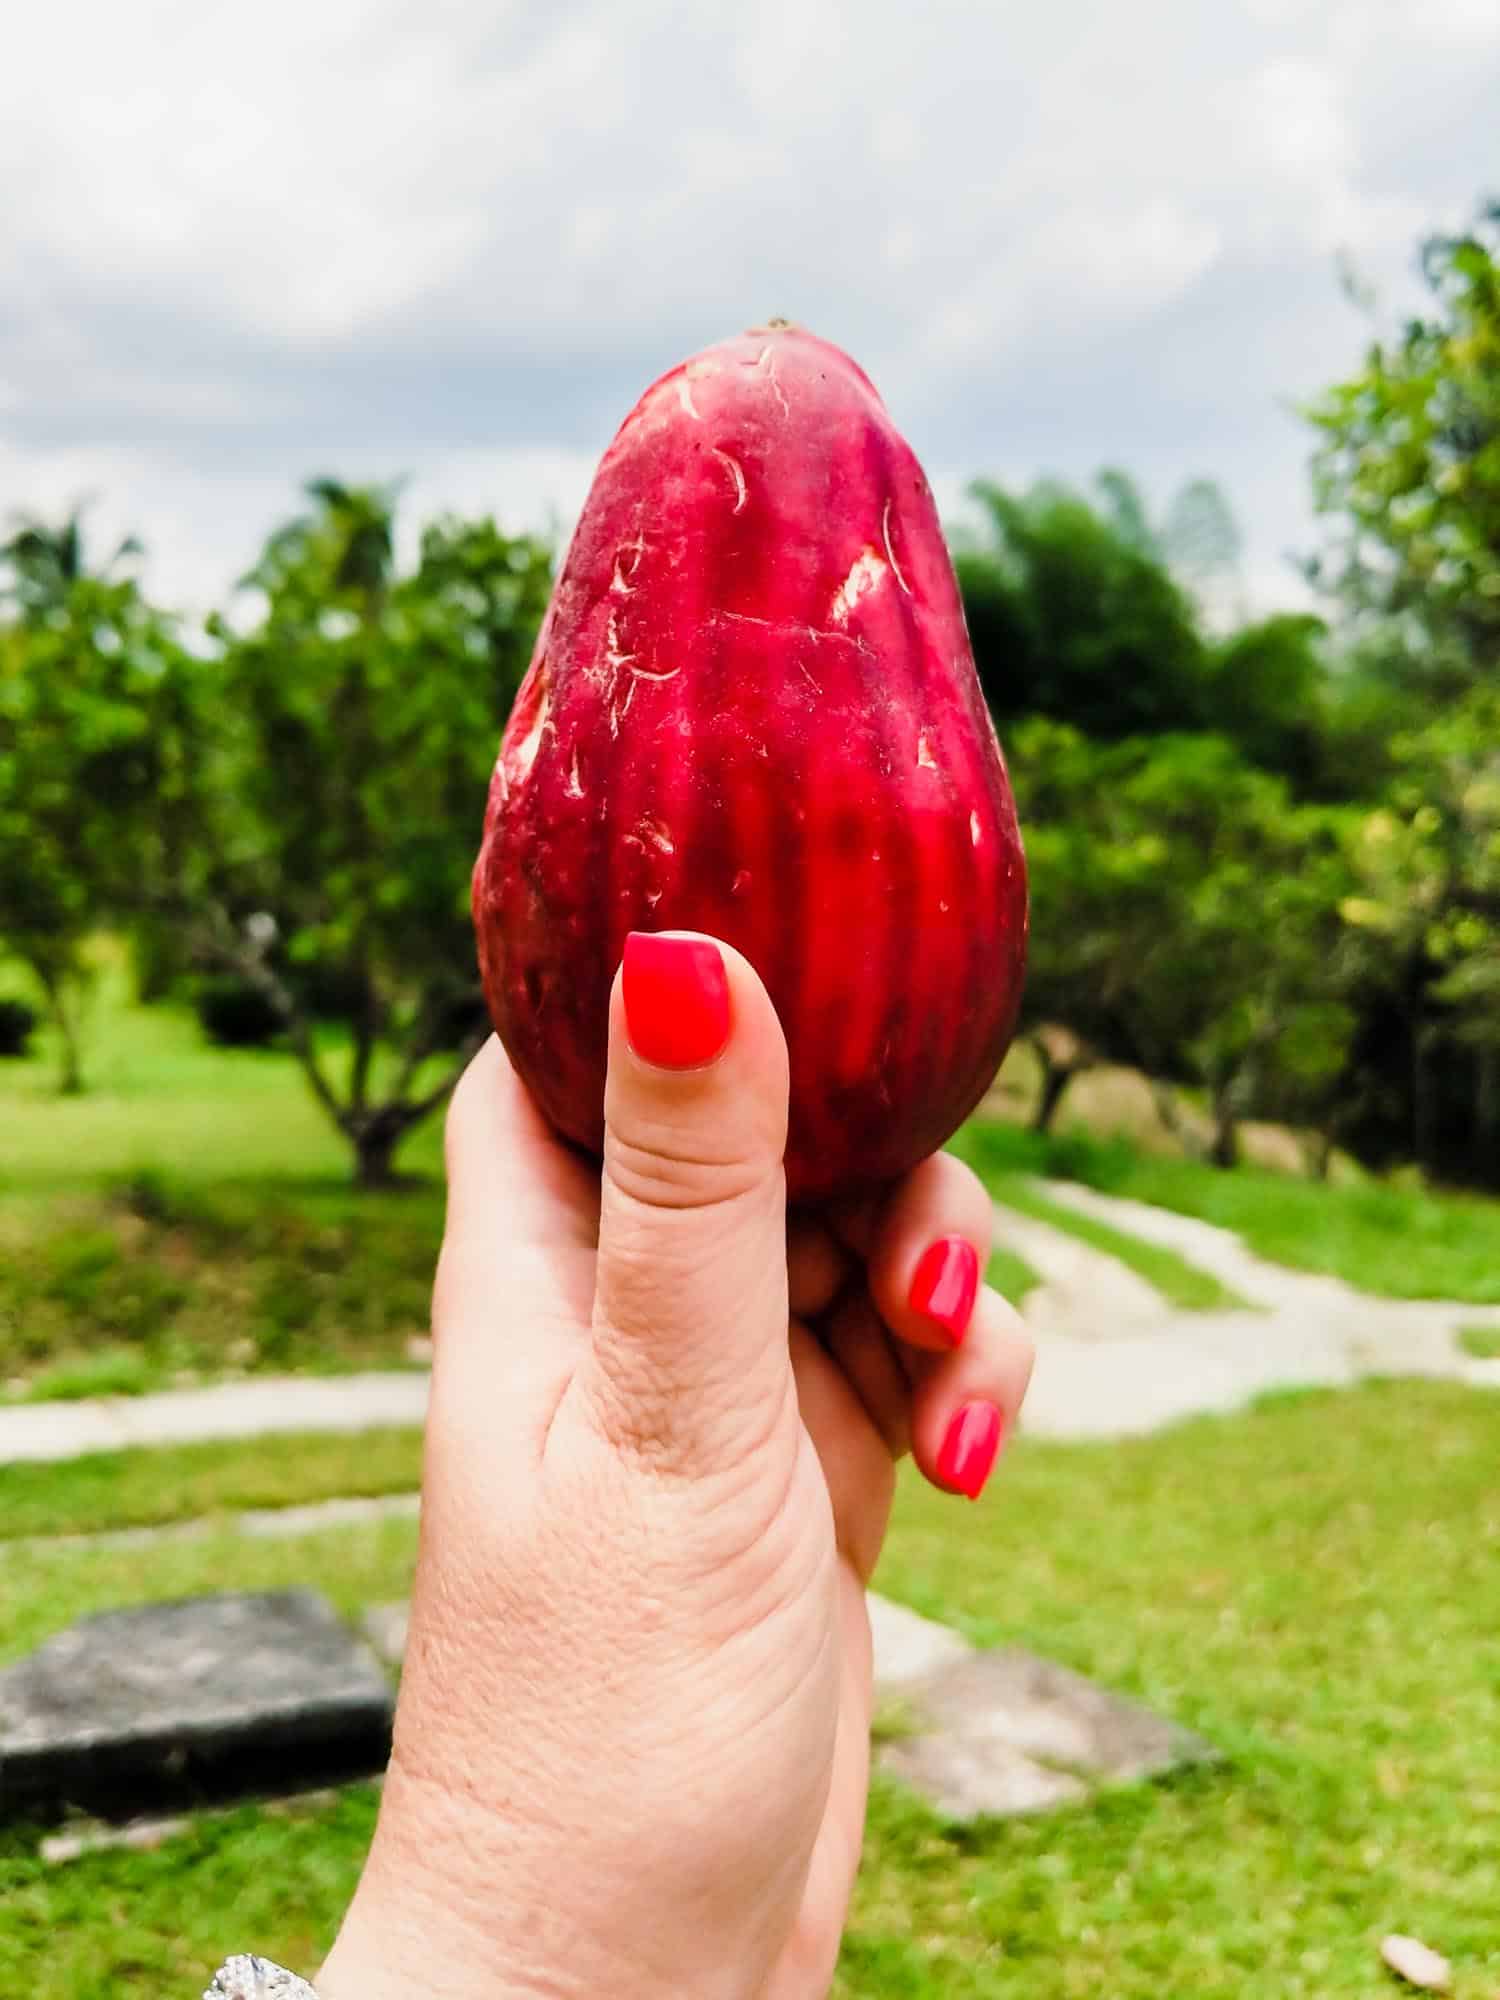 Jamaican mountain apple or Otaheite Apple in a woman's hand